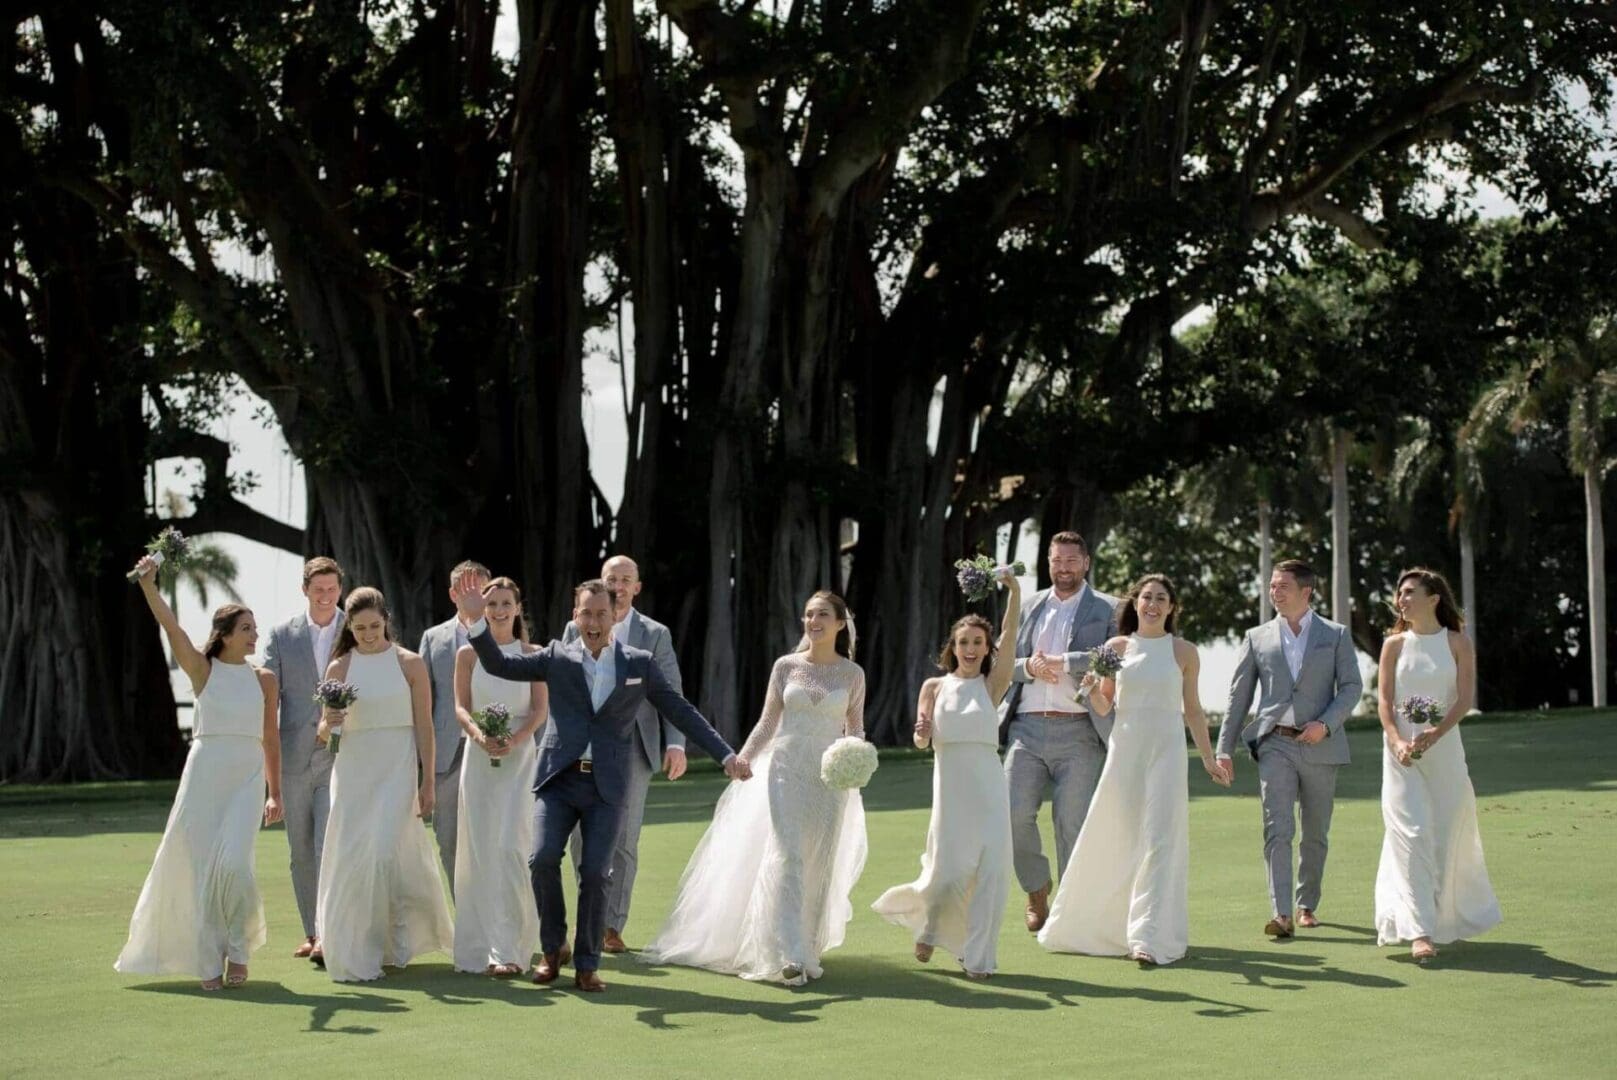 A wedding party walking joyfully on a grassy lawn under large trees, with the bride and groom leading, surrounded by bridesmaids and groomsmen.